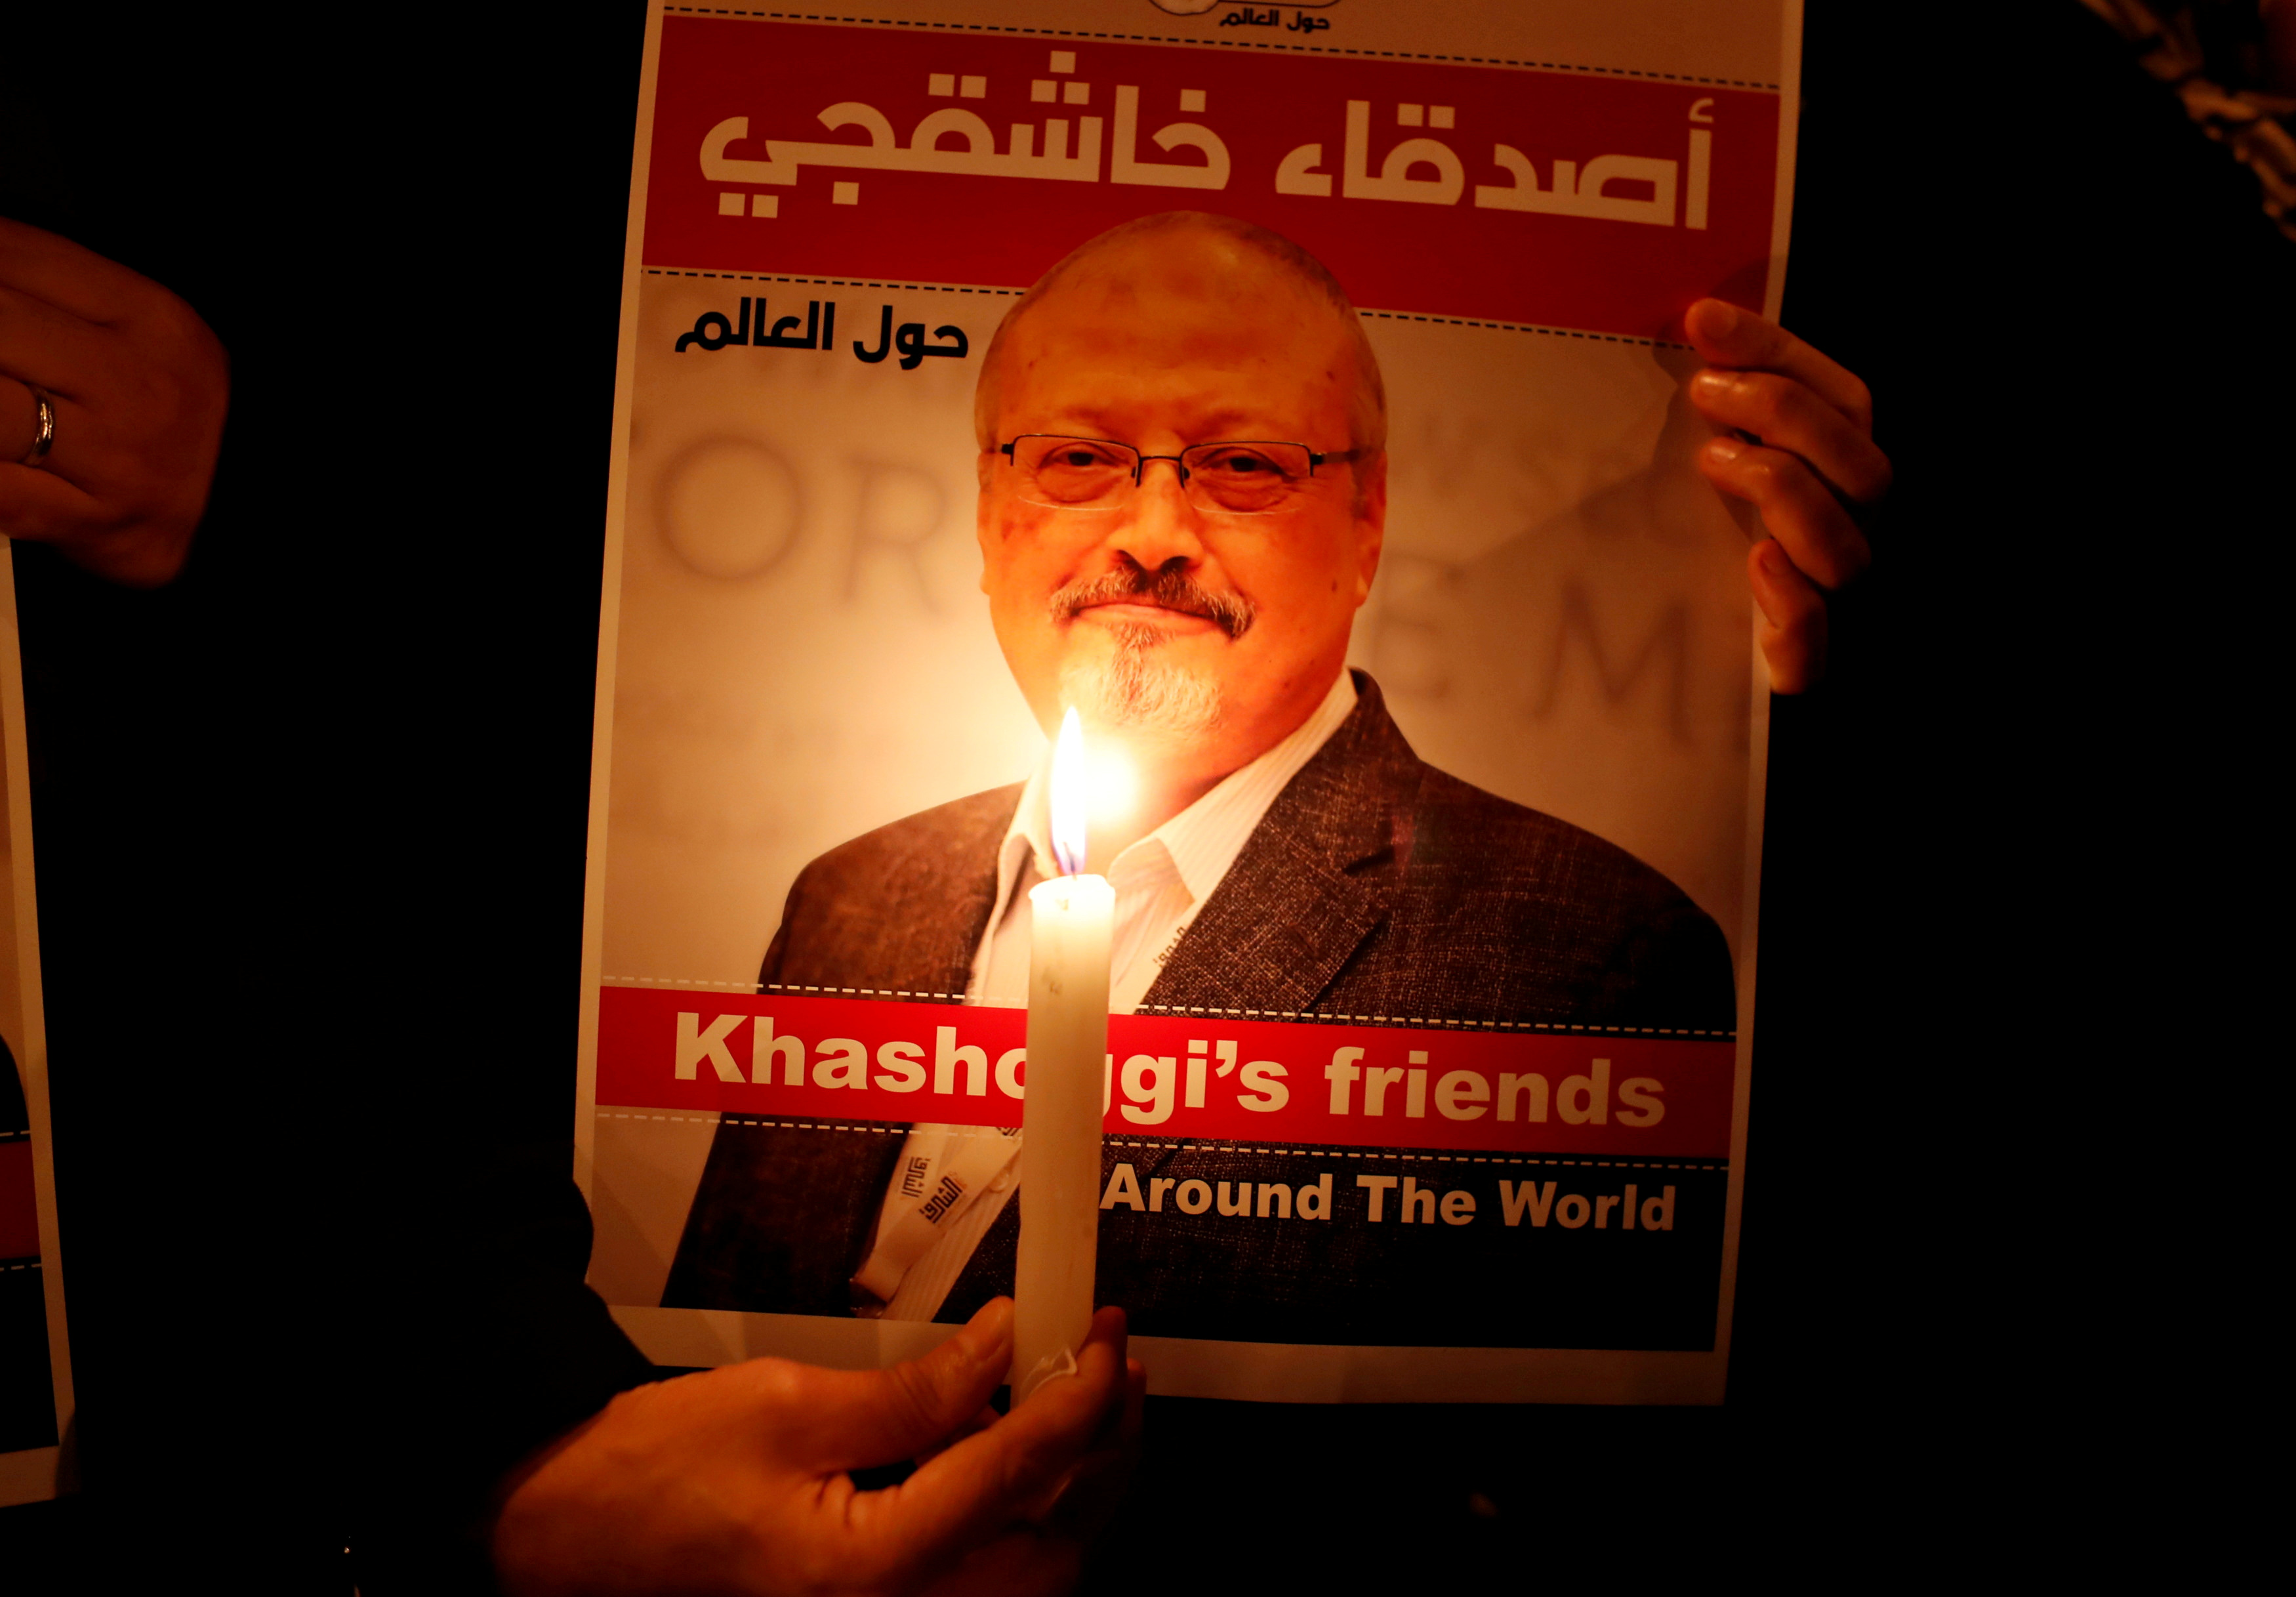 A demonstrator holds a poster with a picture of Saudi journalist Jamal Khashoggi outside the Saudi Arabia consulate in Istanbul, Turkey October 25, 2018. REUTERS/Osman Orsal